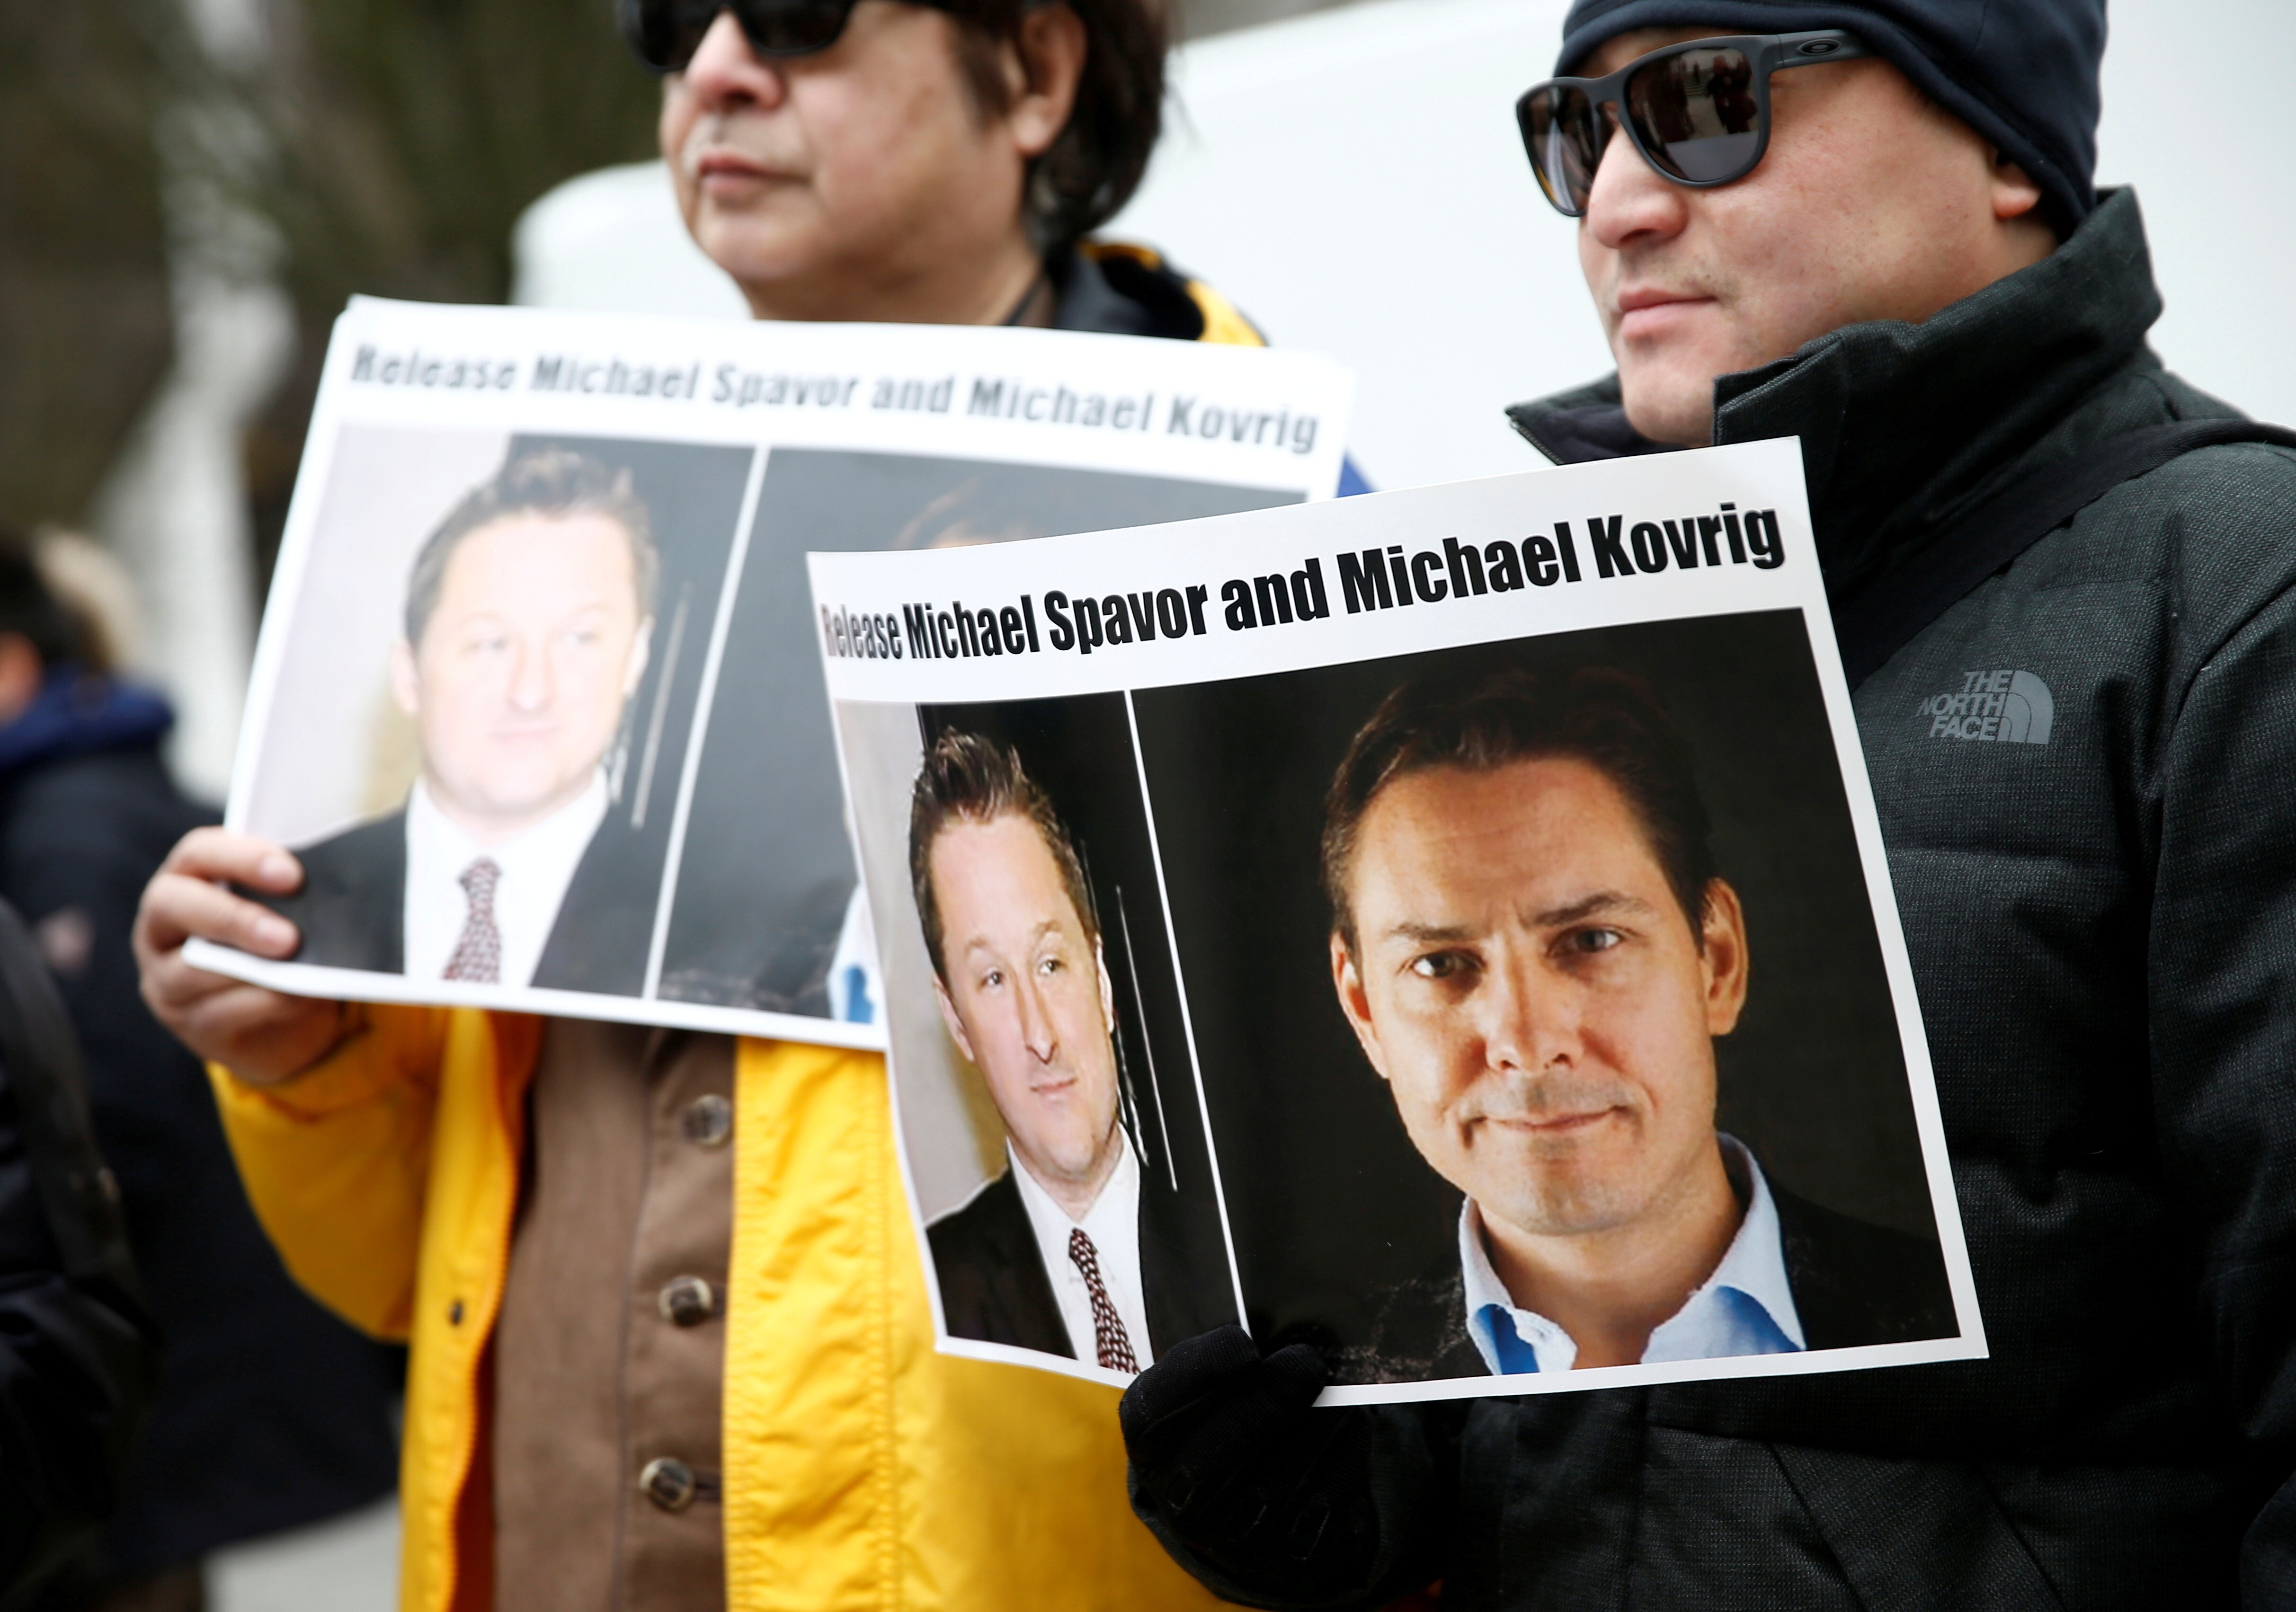 Supporters of the two men outside a court hearing for Meng Wanzhou in 2019. Photo: Reuters